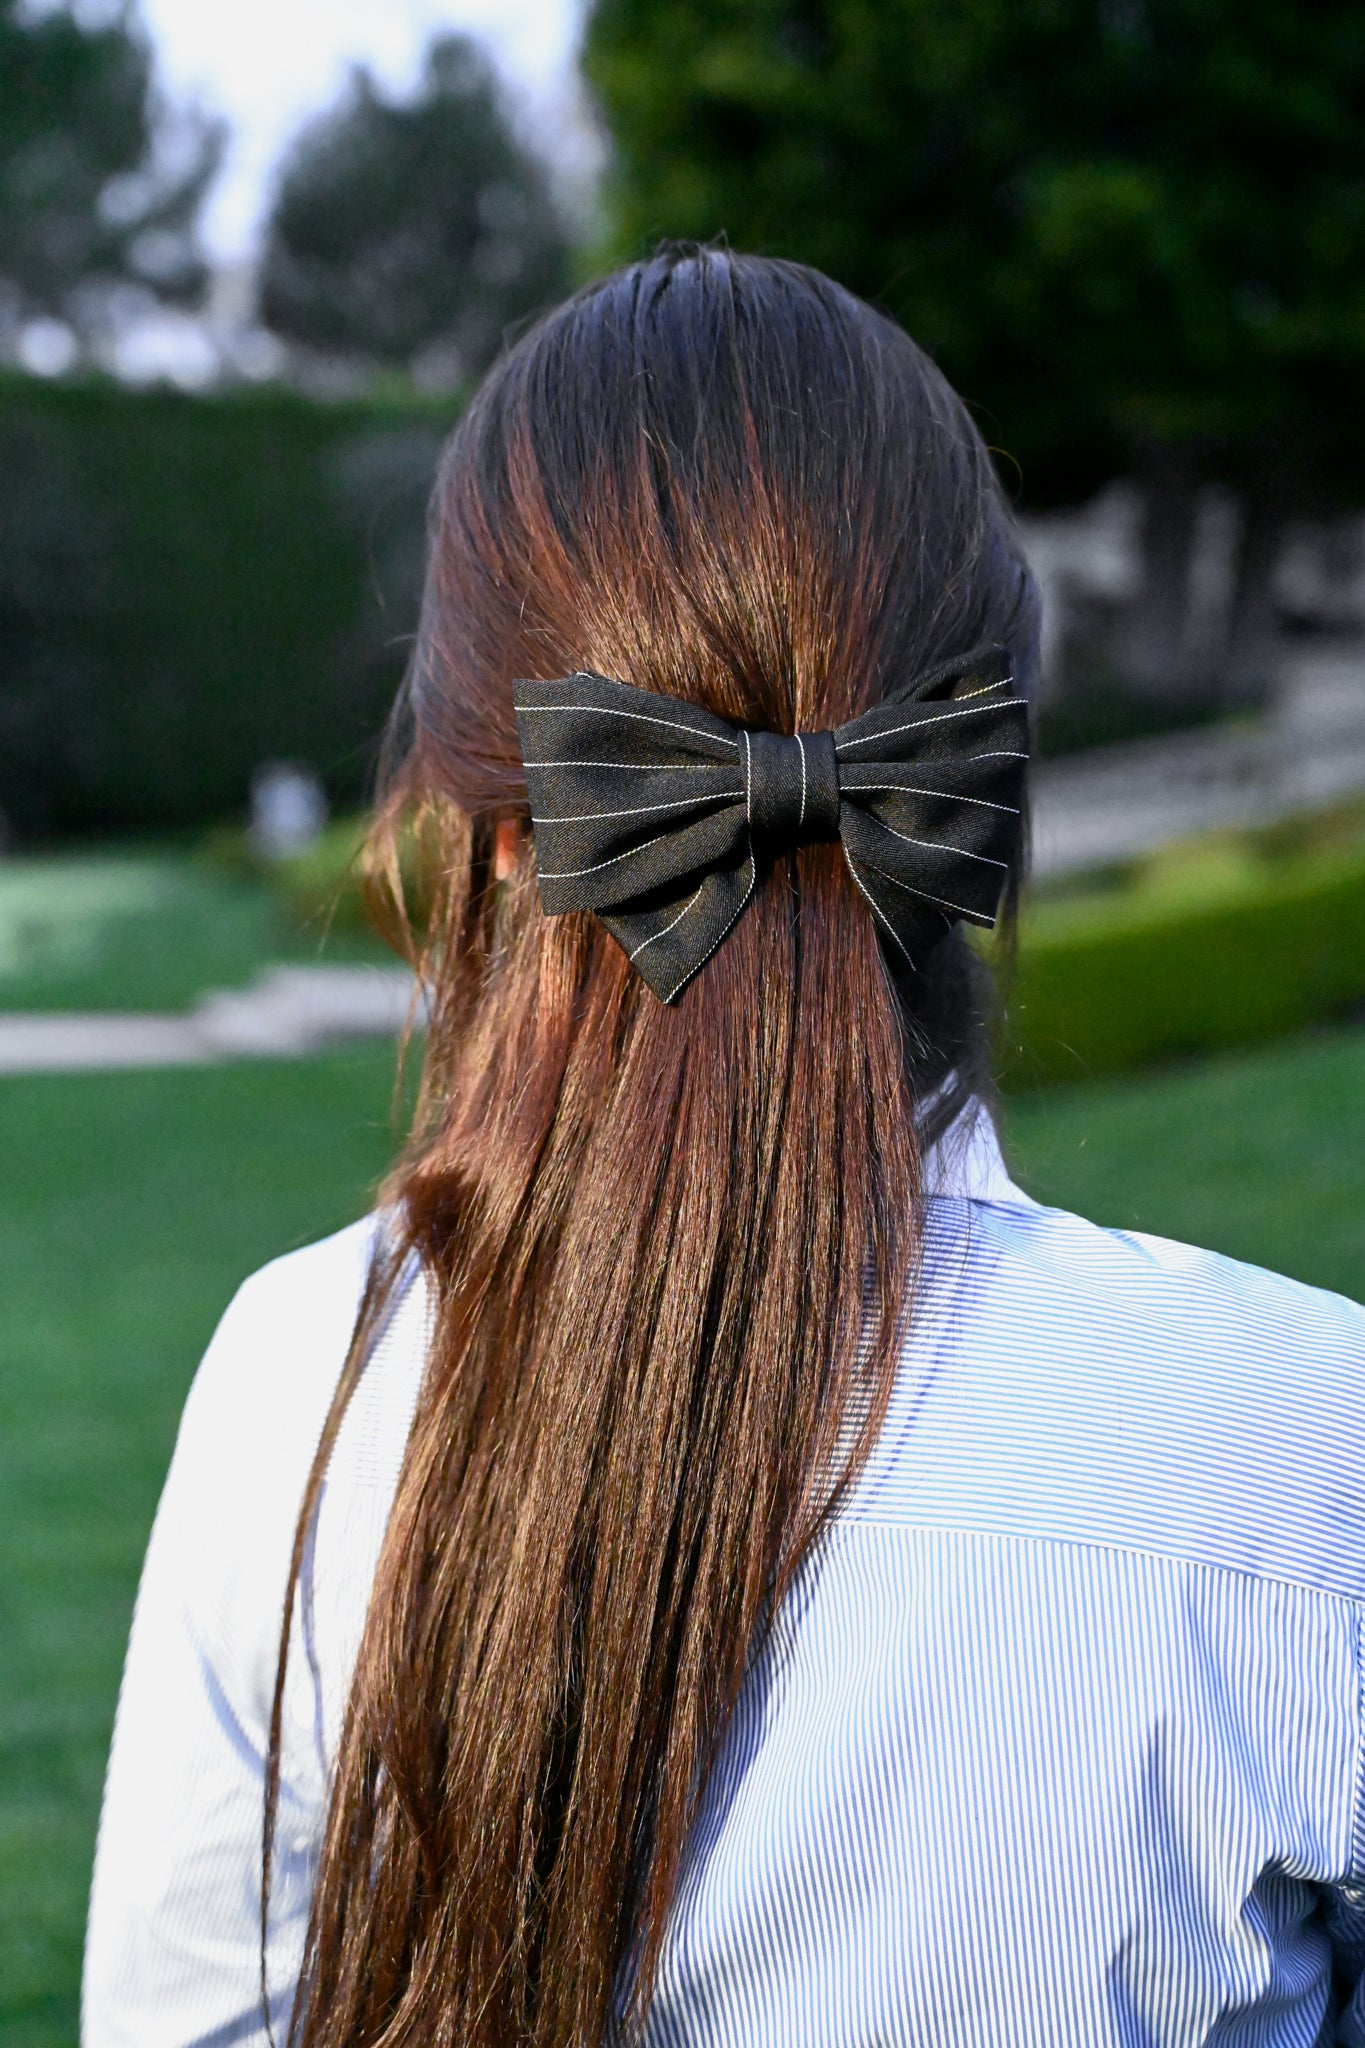 The Pinstripe Bow